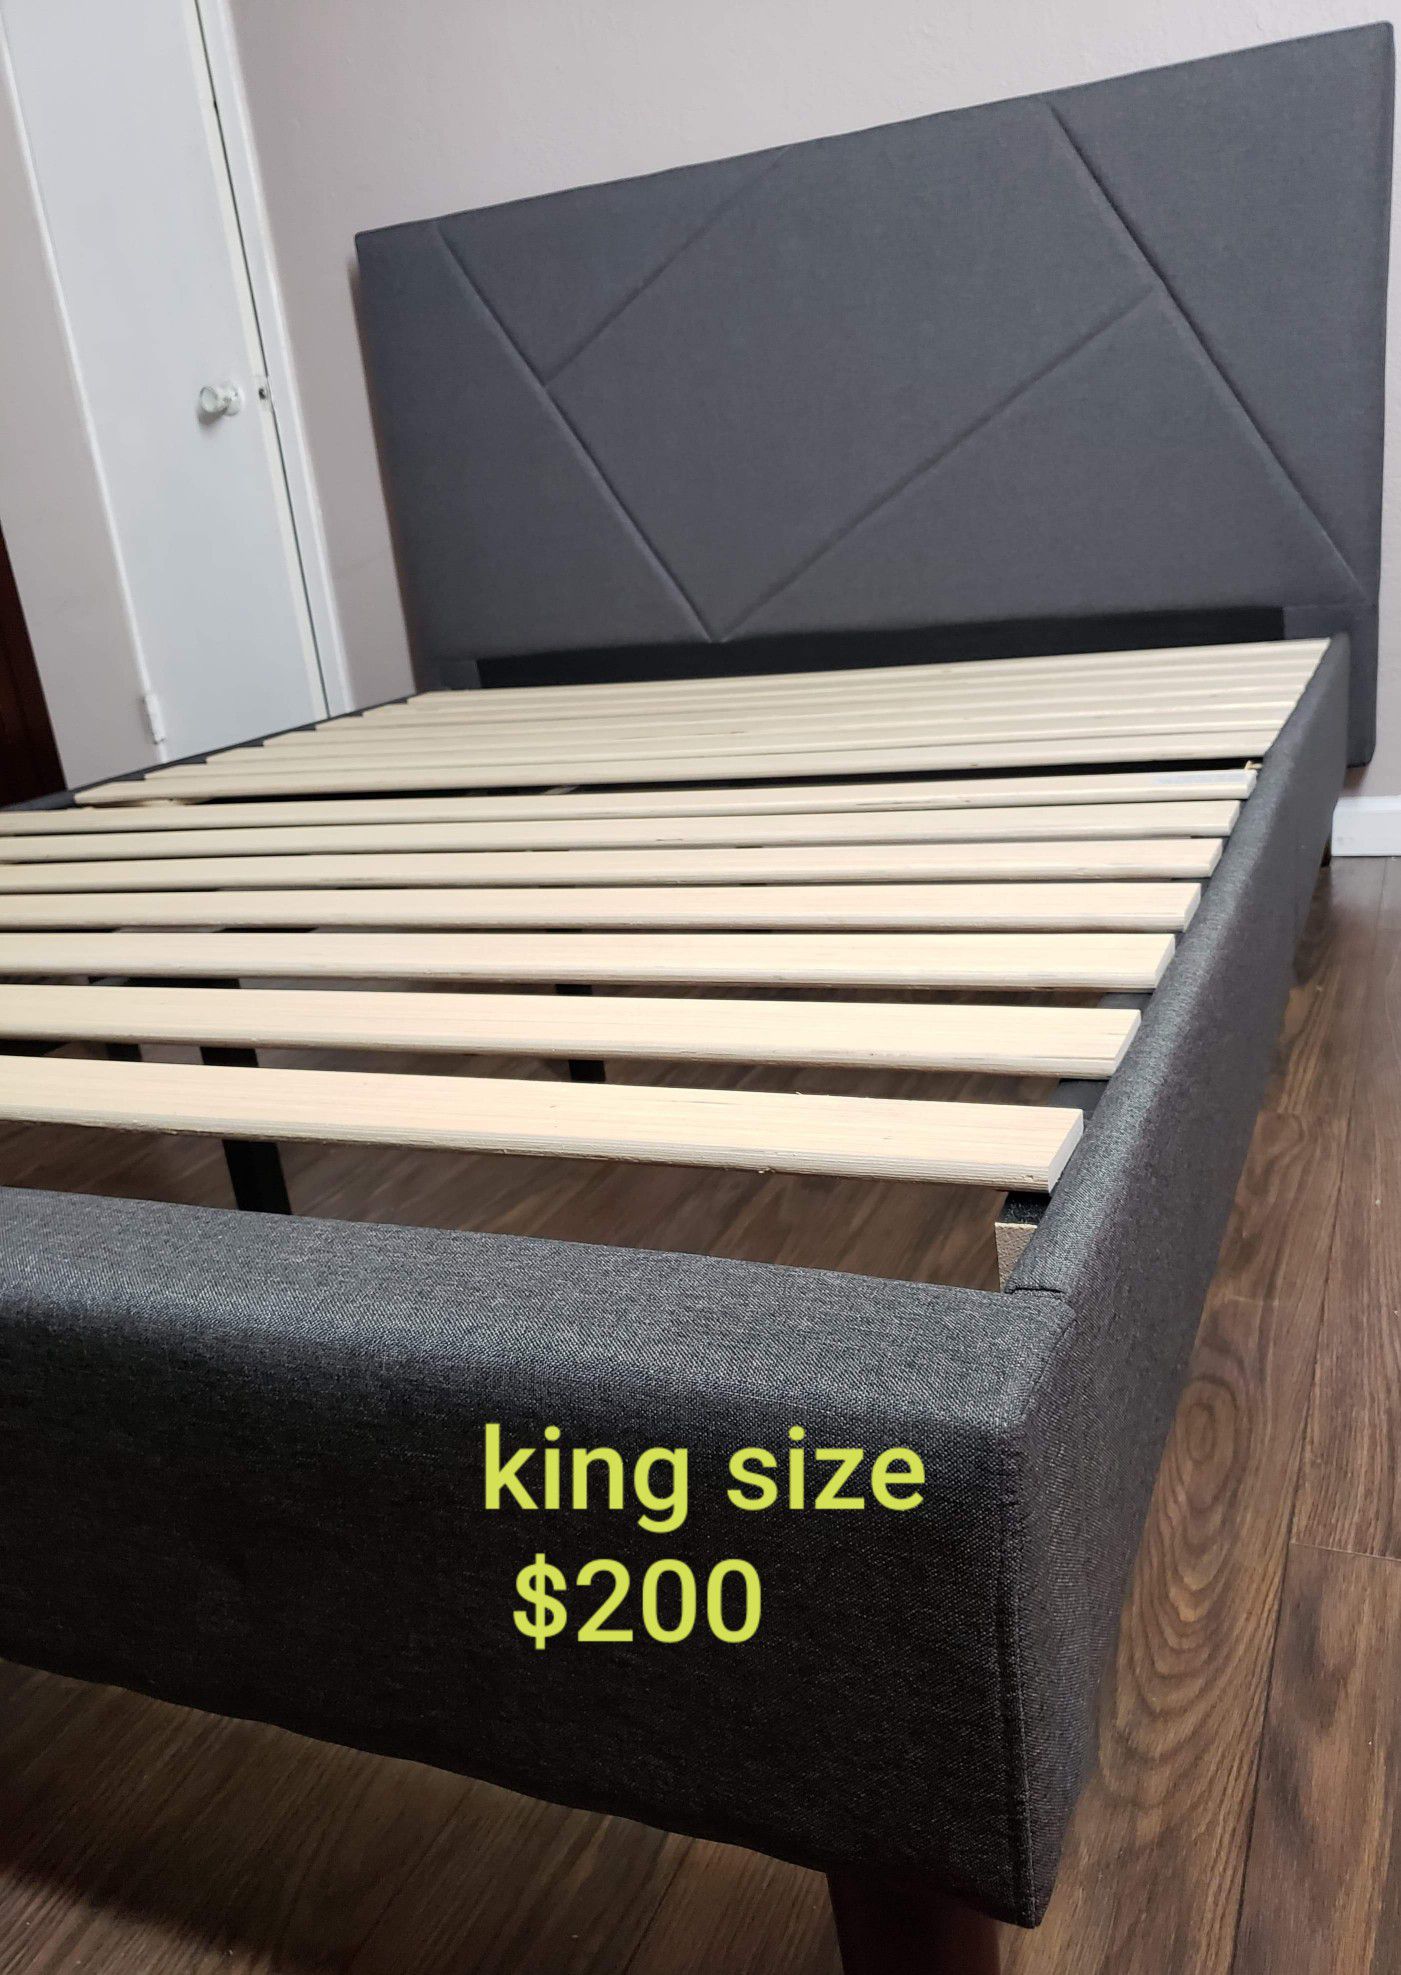 Bed frame king size. Brand new. Free delivery Modesto $200